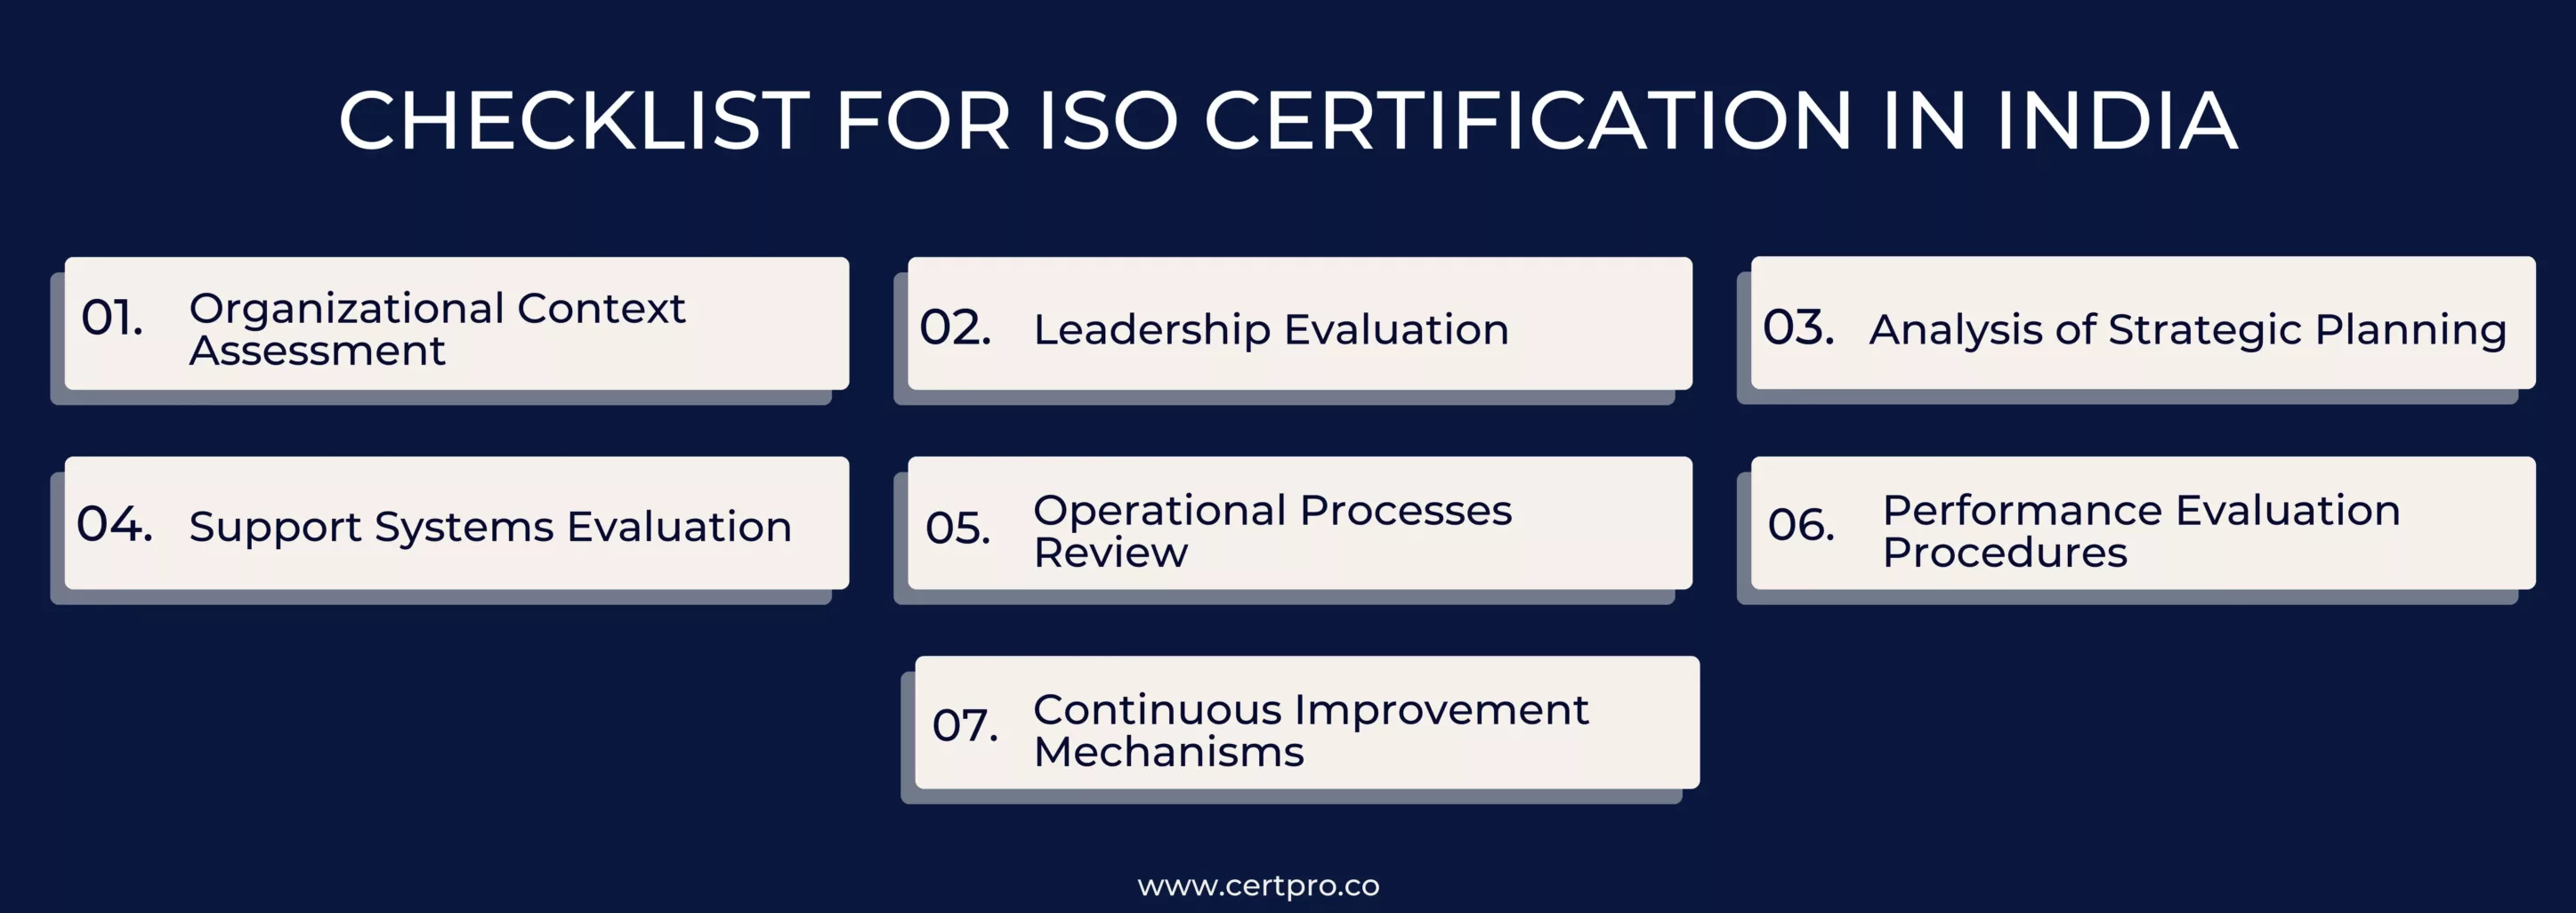 Checklist for ISO Certification